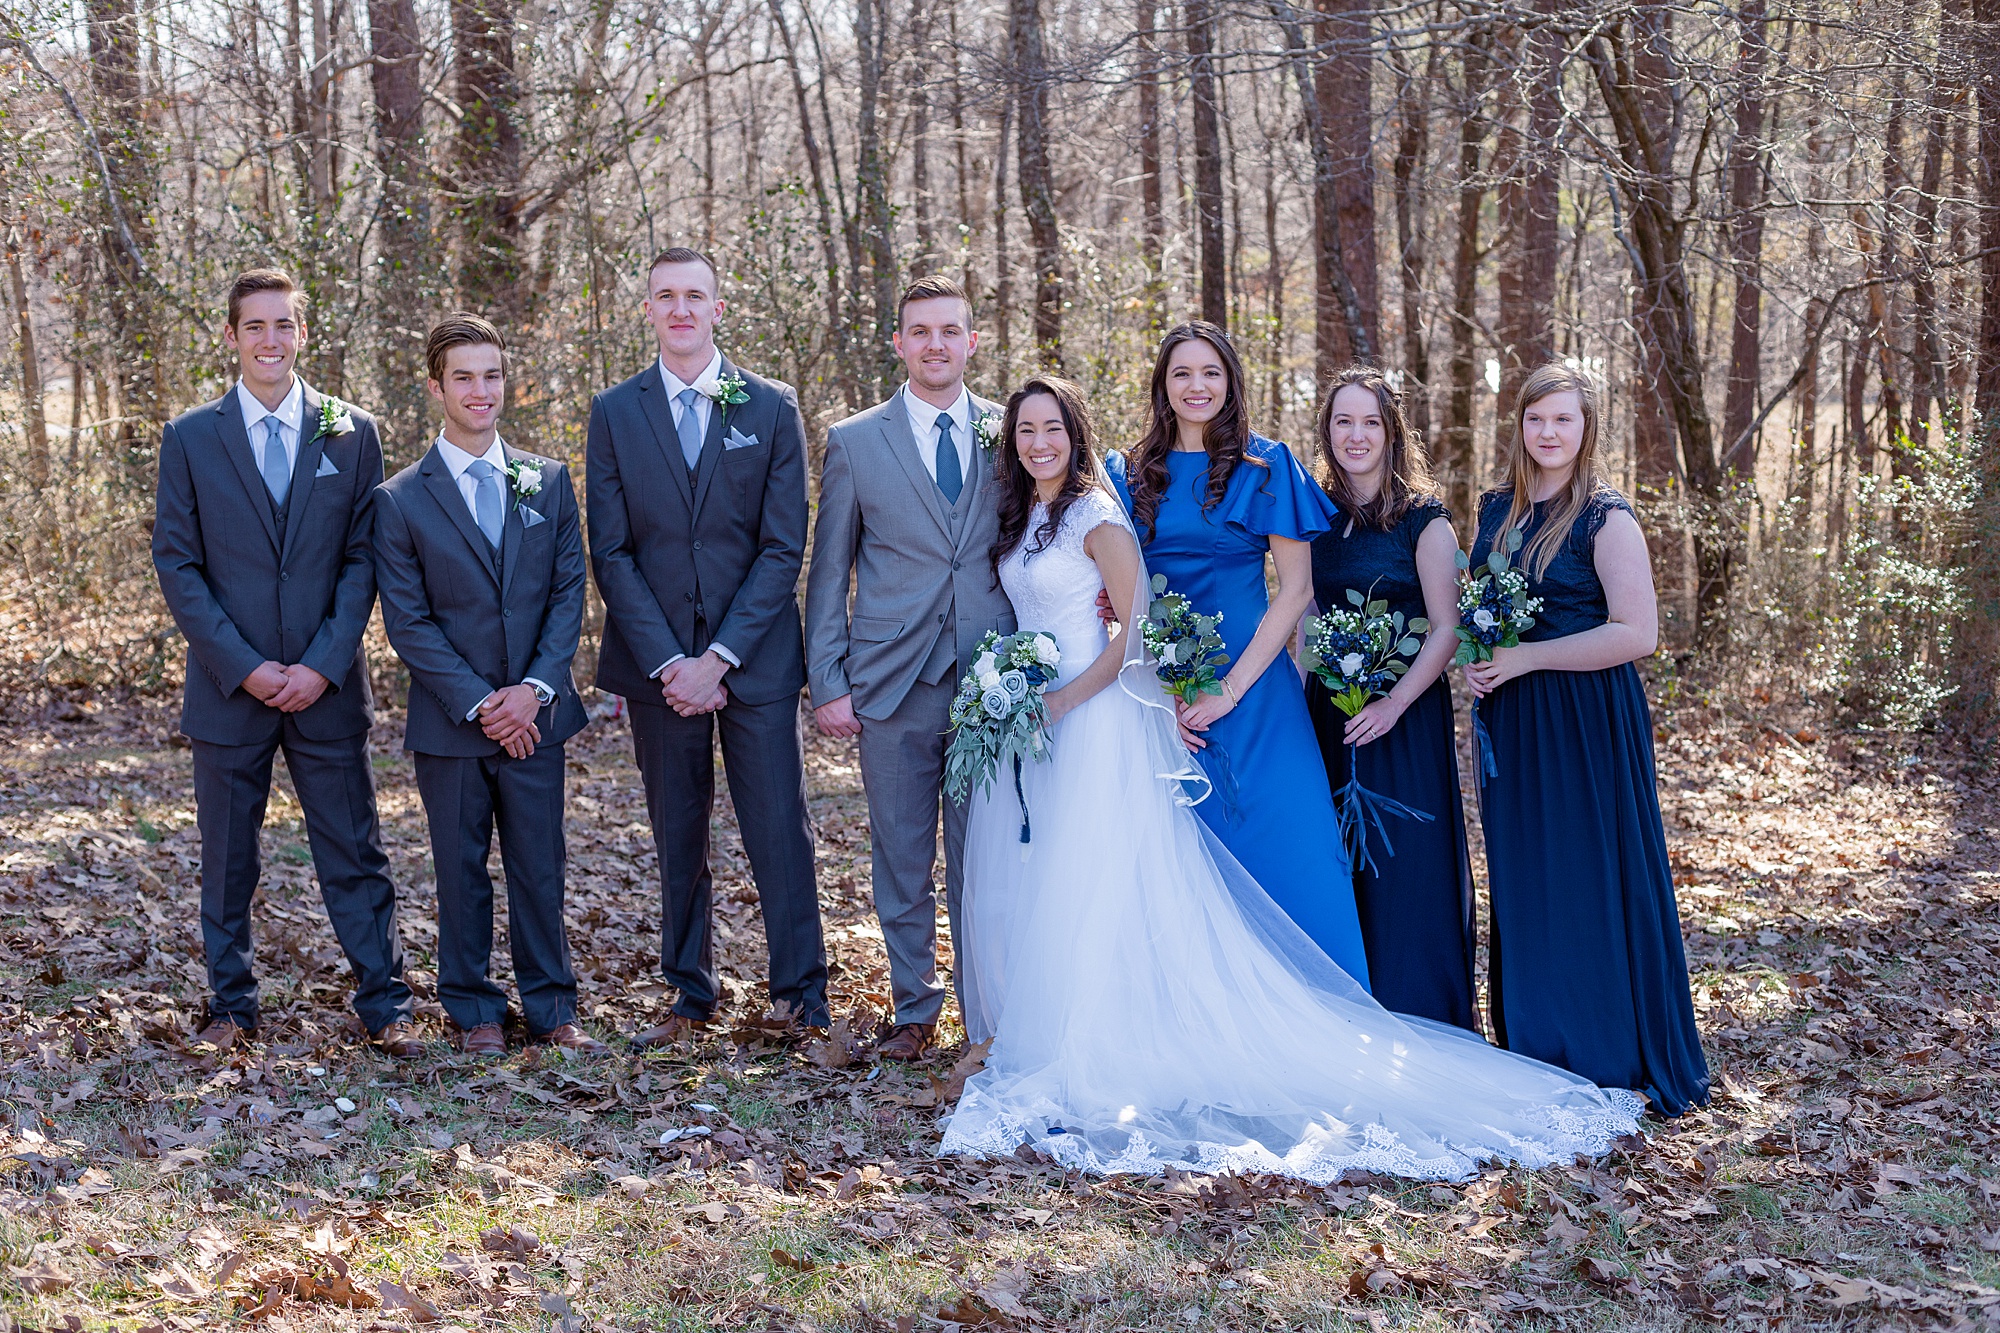 wedding party poses with bride and groom after winter wedding in Middle Tennessee